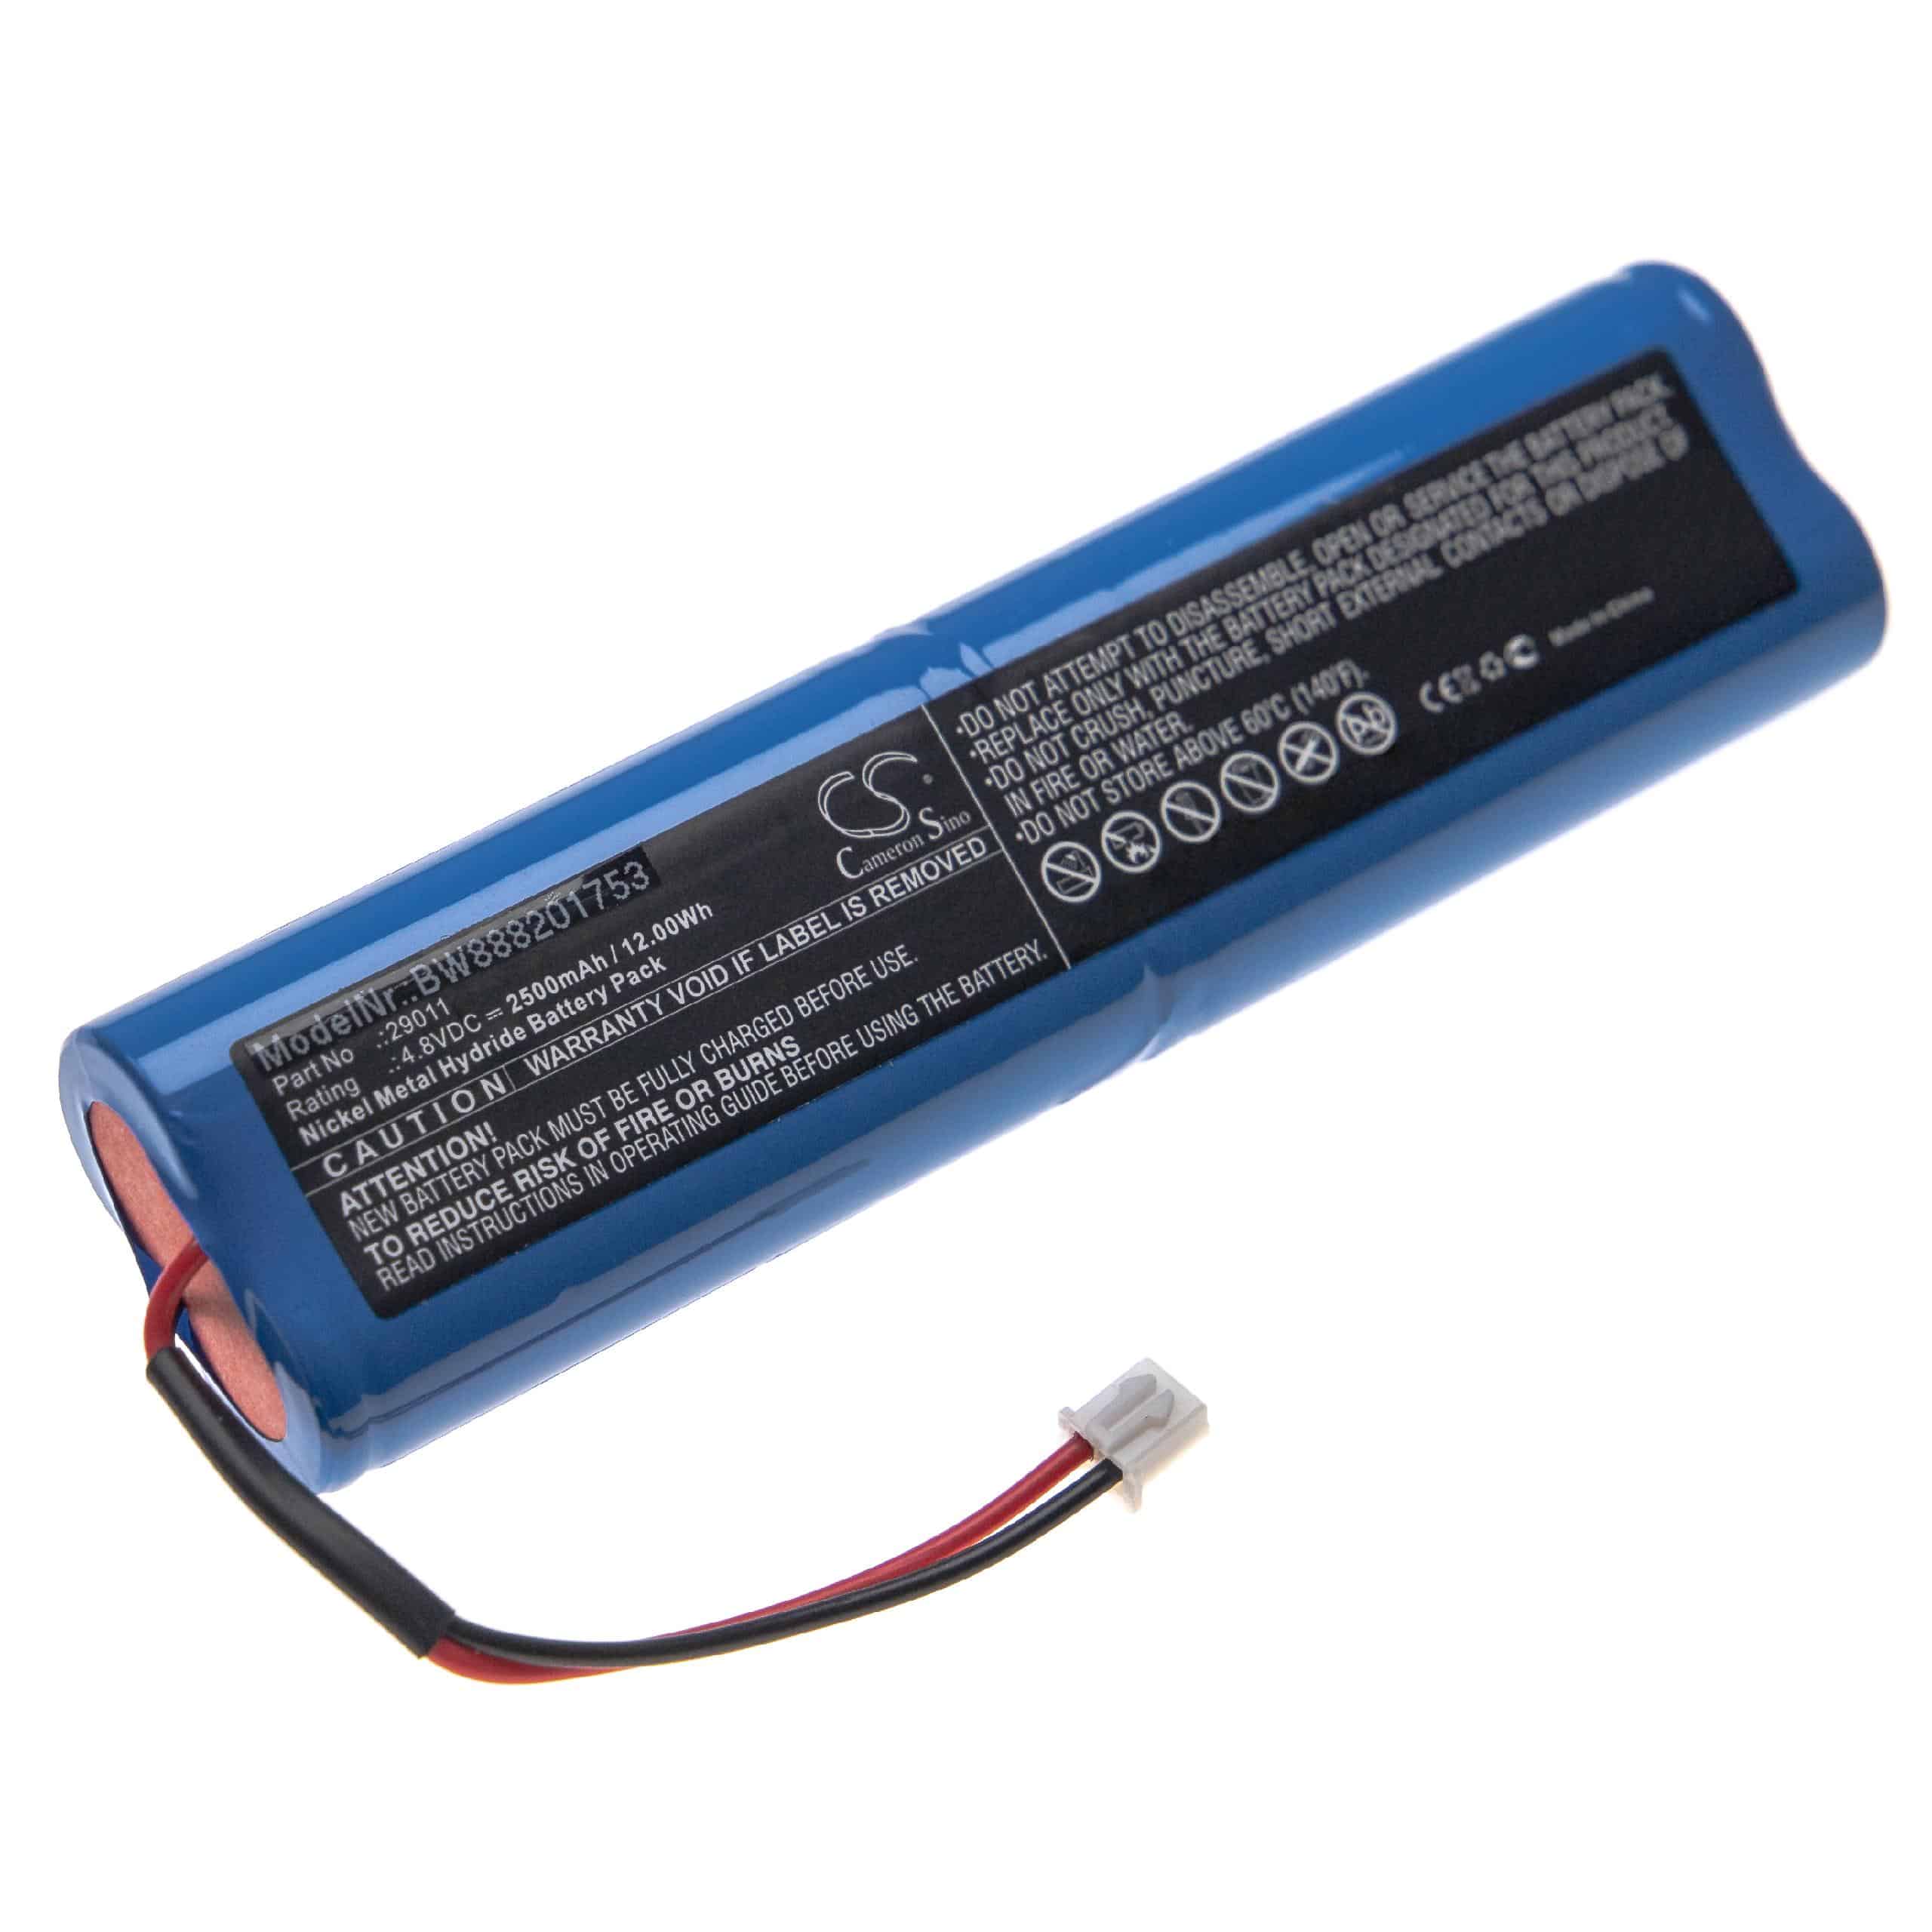 Torch - Battery Replacement for HAZET 29011 - 2500mAh 4.8V NiMH